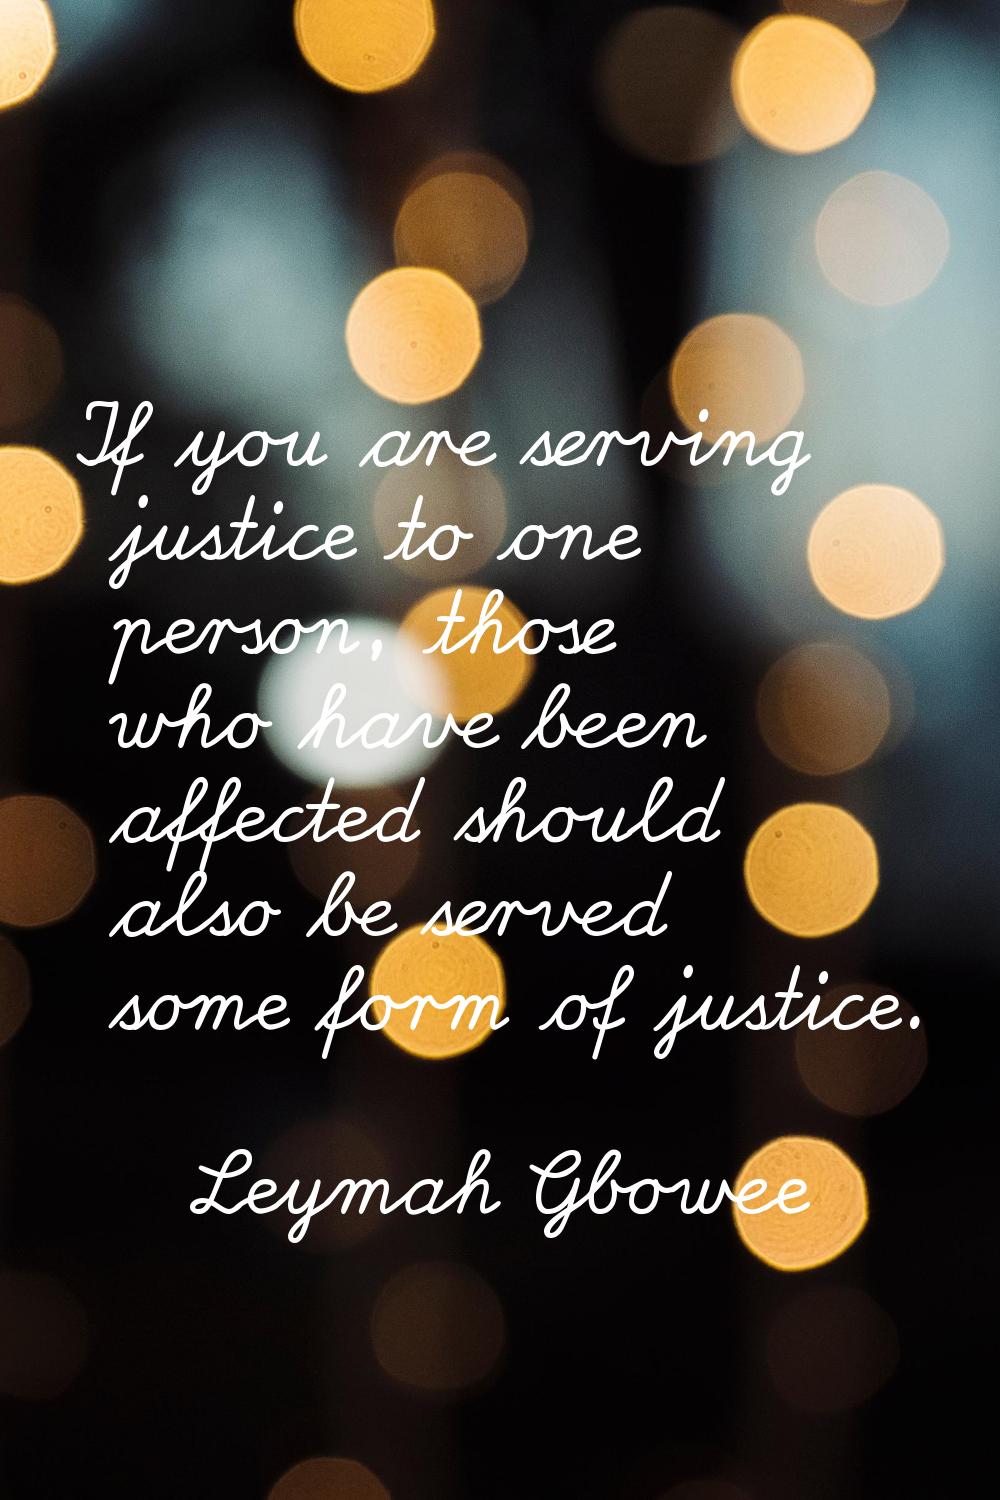 If you are serving justice to one person, those who have been affected should also be served some f